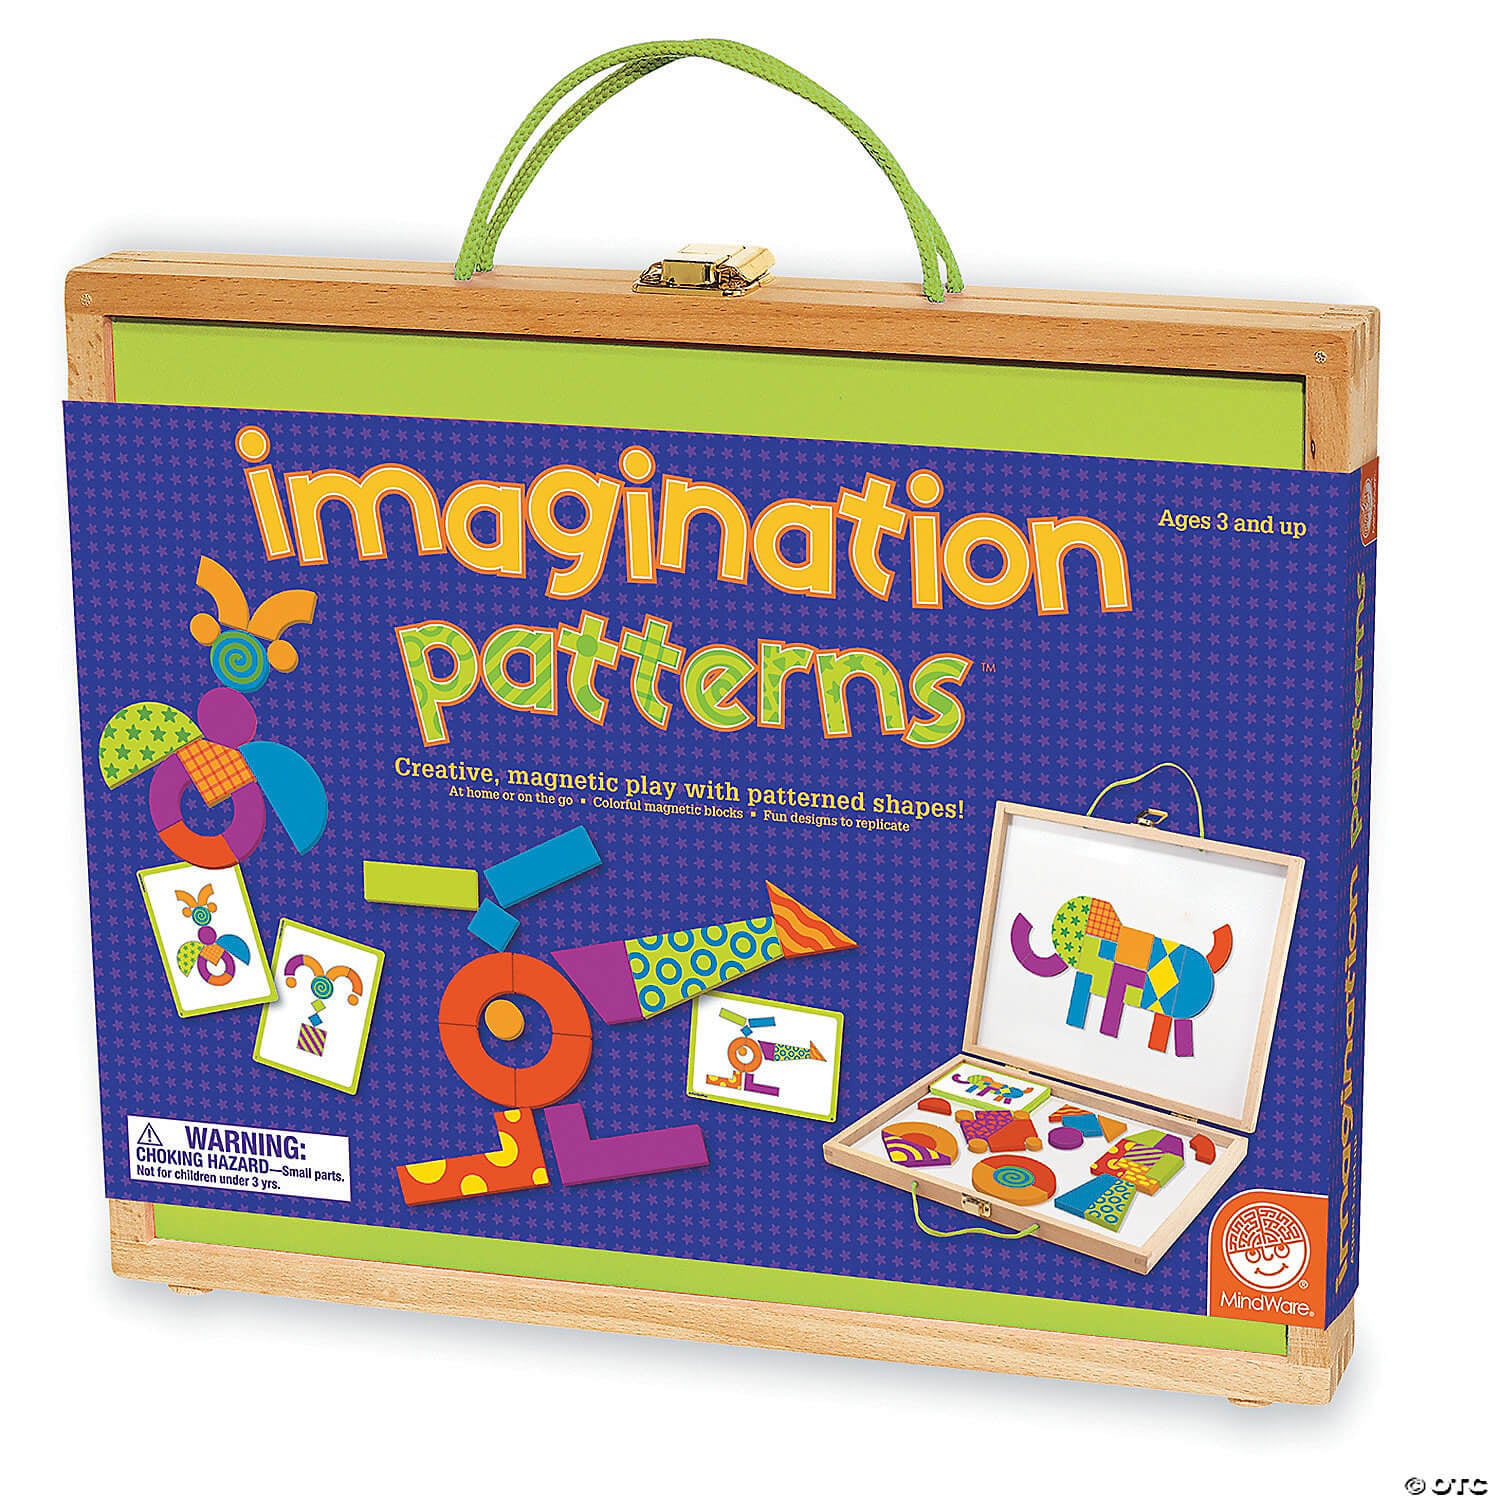 Imagination Patterns  Cogs Toys & Games Ireland